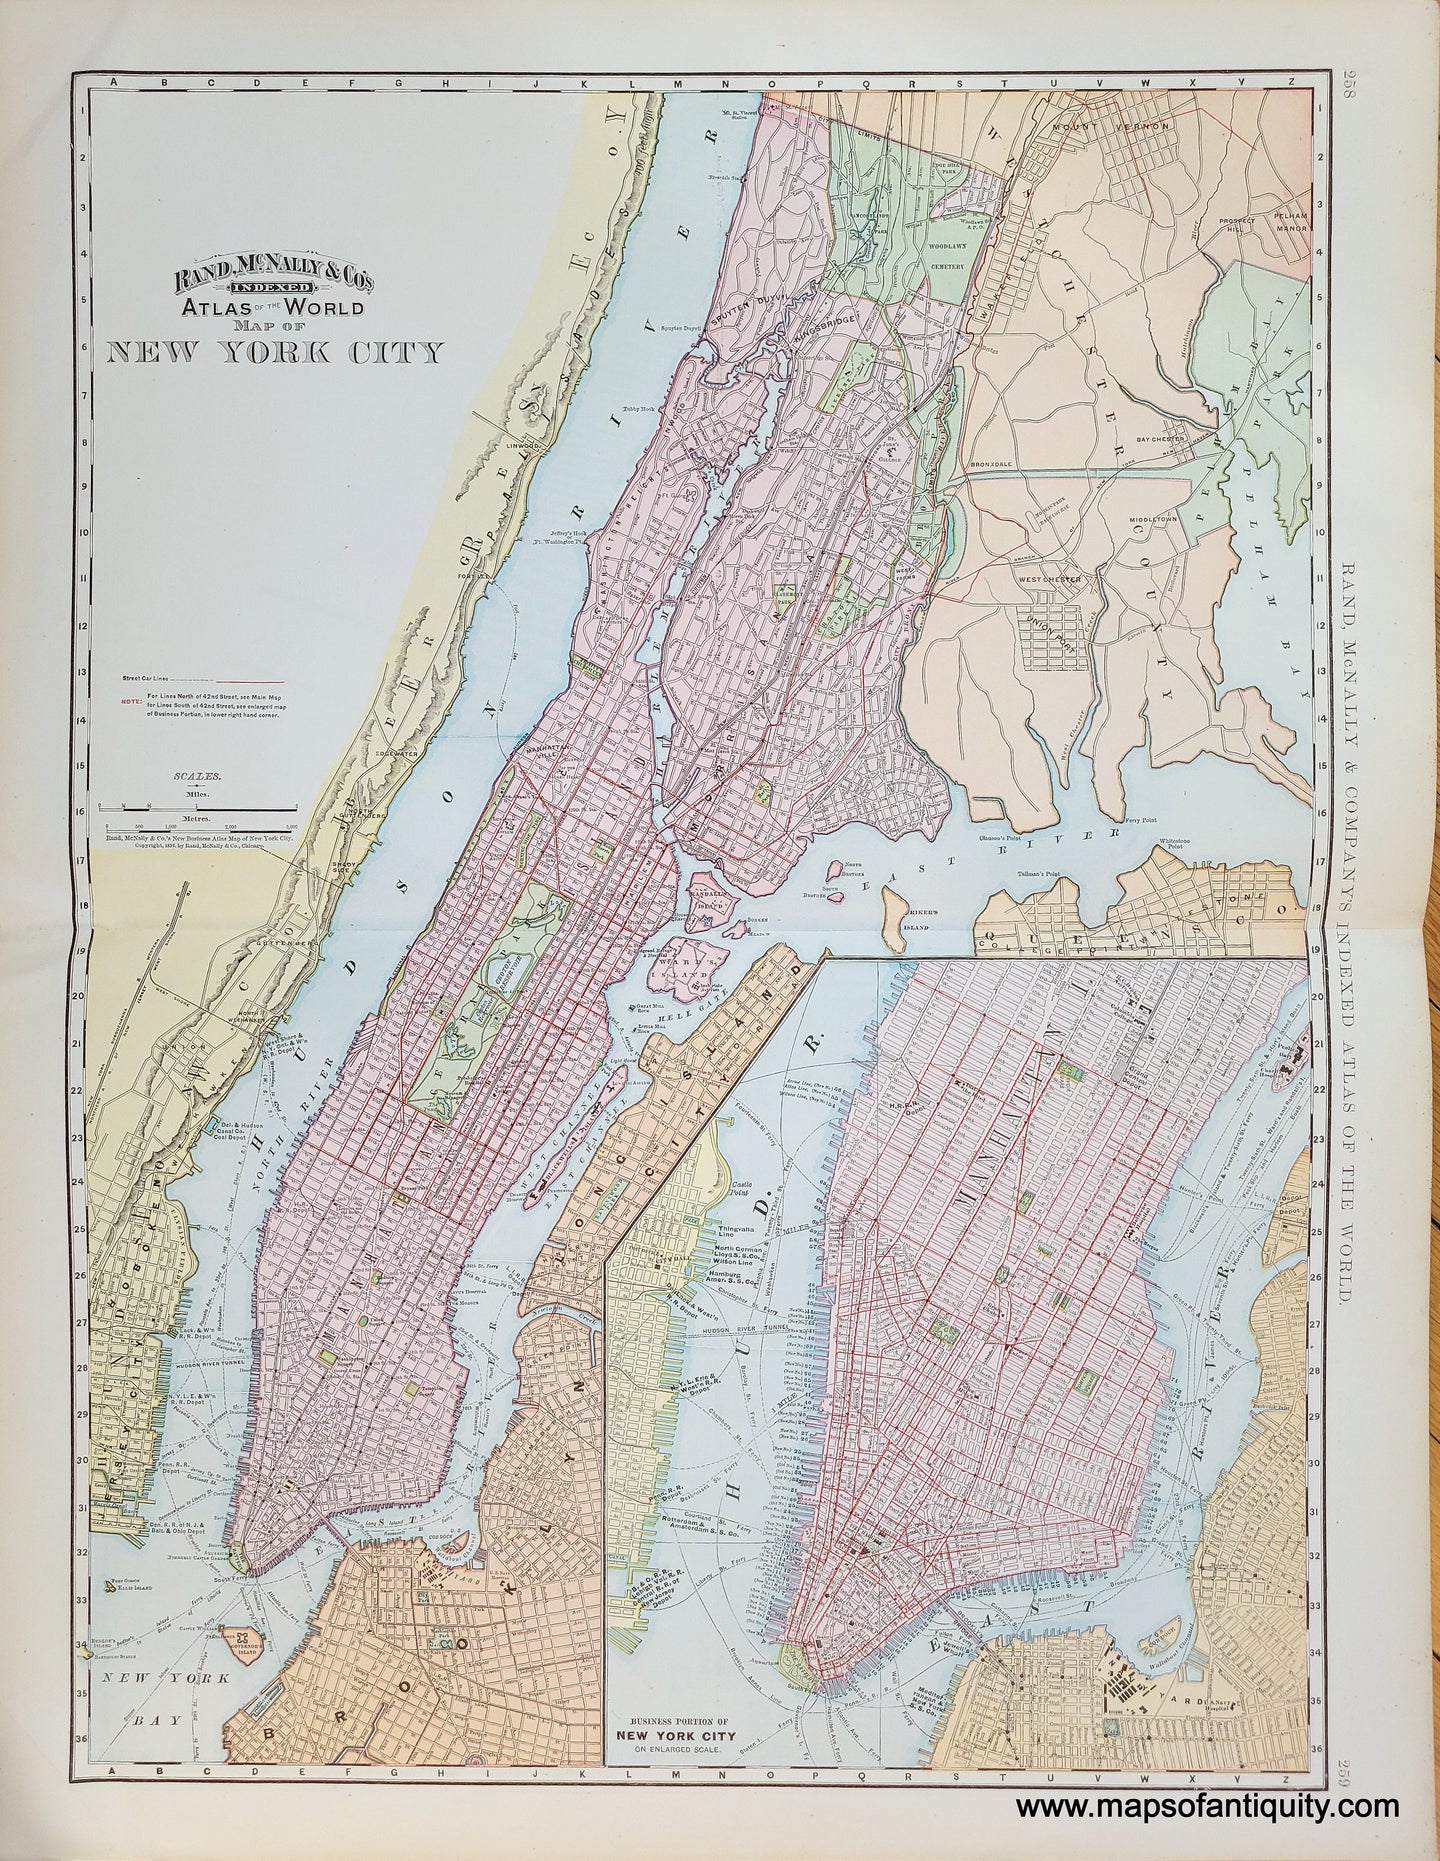 Maps-Antiquity-Antique-Map-NYC-New-York-City-Brooklyn-Jersey-City-Manhattan-Rand-McNally-1892-1800s-Early-20th-Century